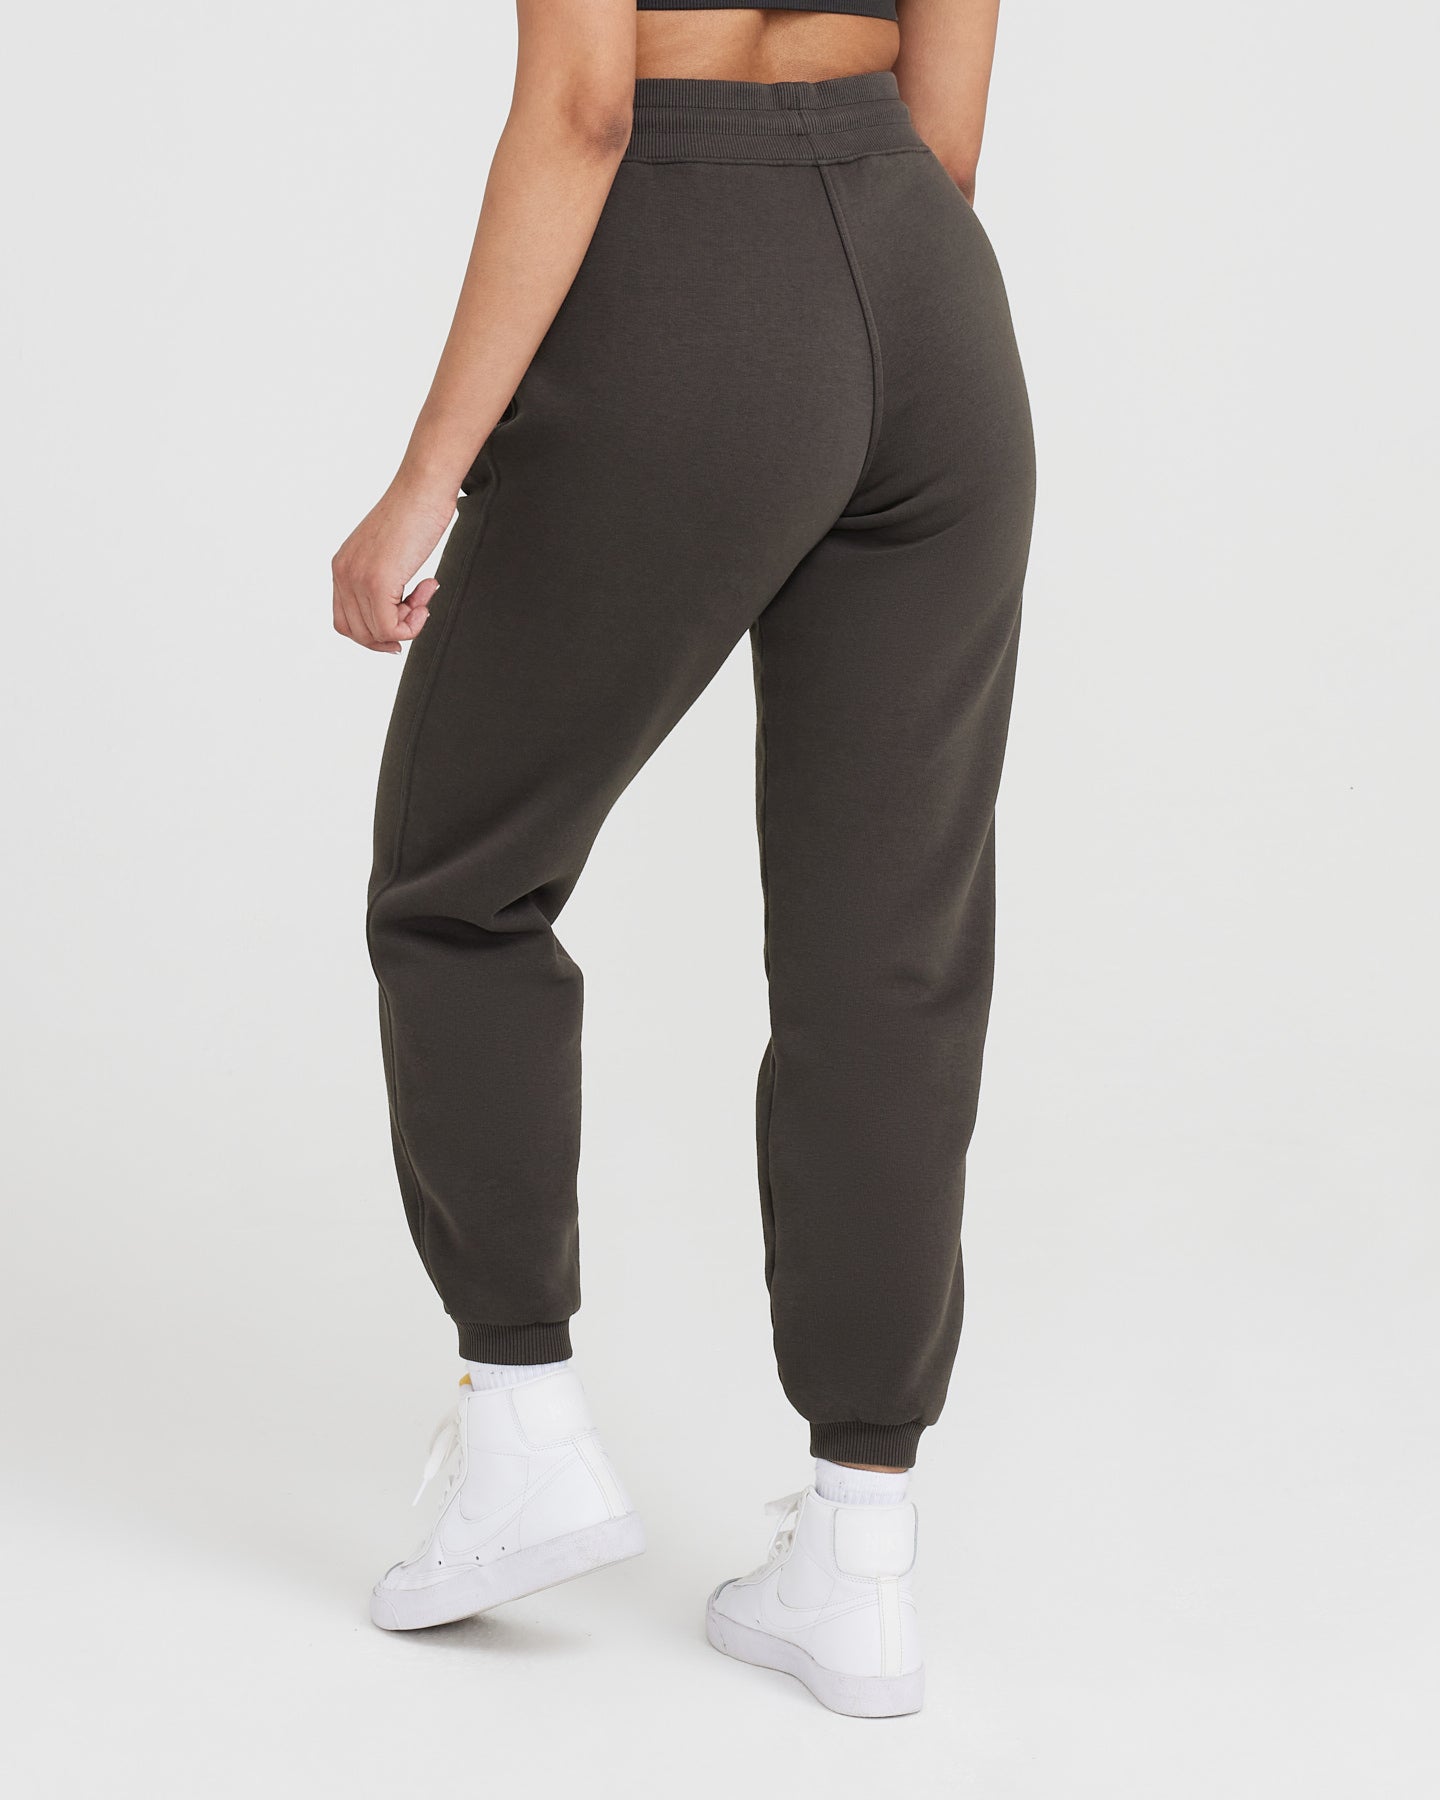 Super High Rise Brushed Bubblelime Yoga Pants  With Pockets Solid  Color, Buttery Soft, Running Tight Sweatpants For Women T Line Style From  Wslly104104, $17.57